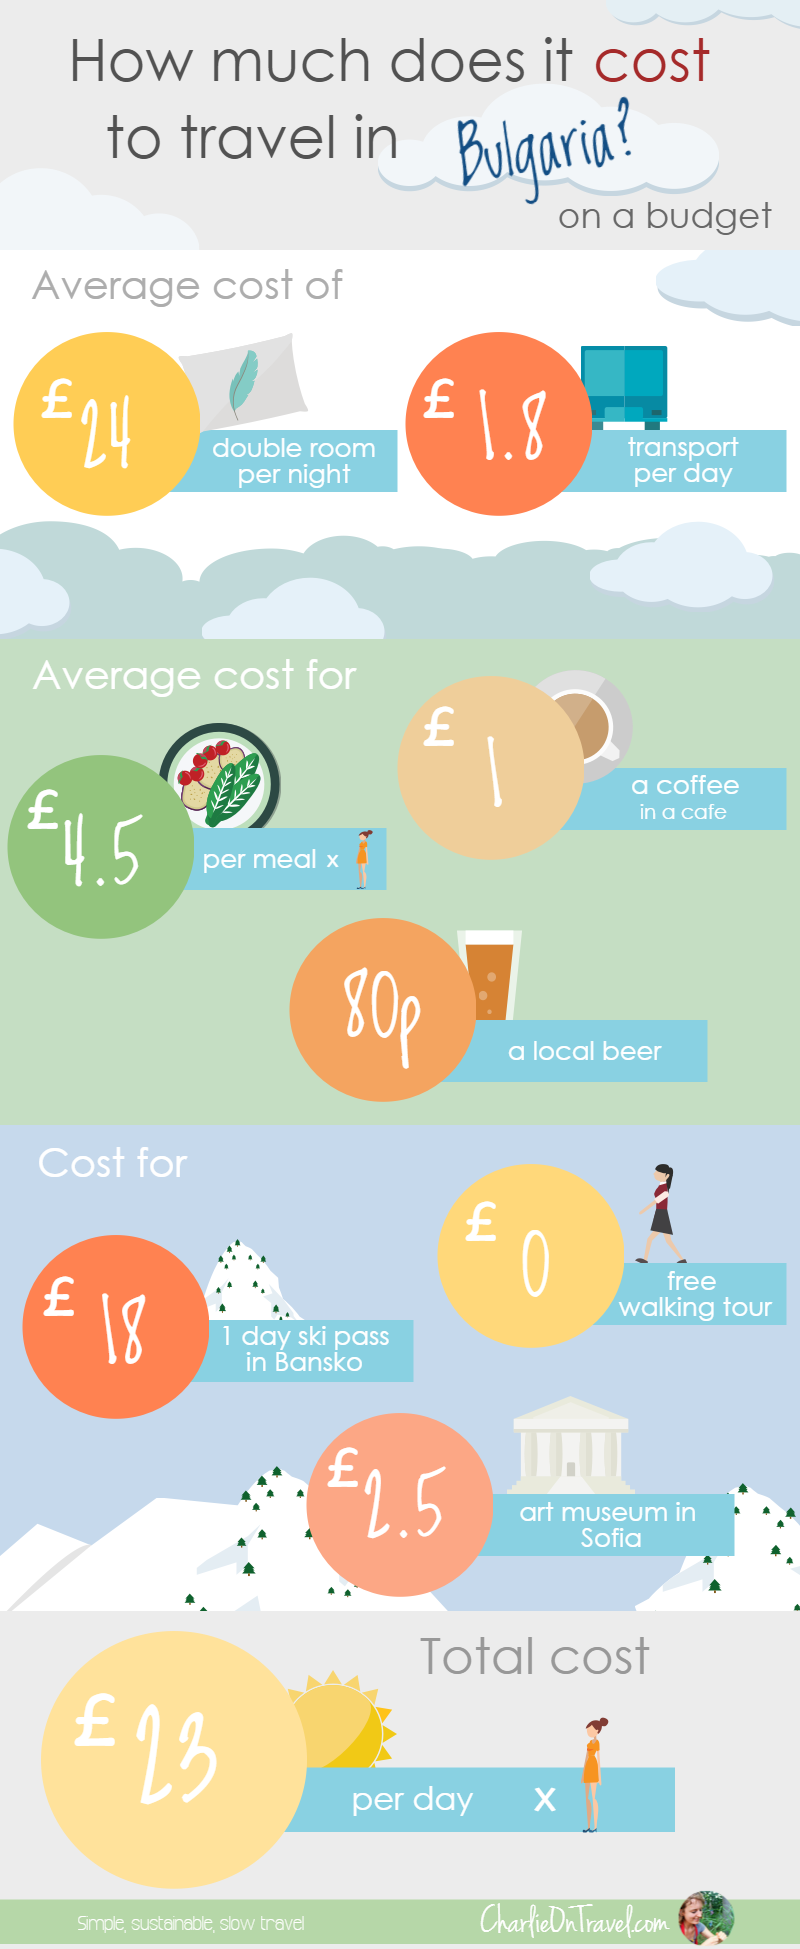 Cost of Travel in Bulgaria Infographic by Charlie on Travel 2016